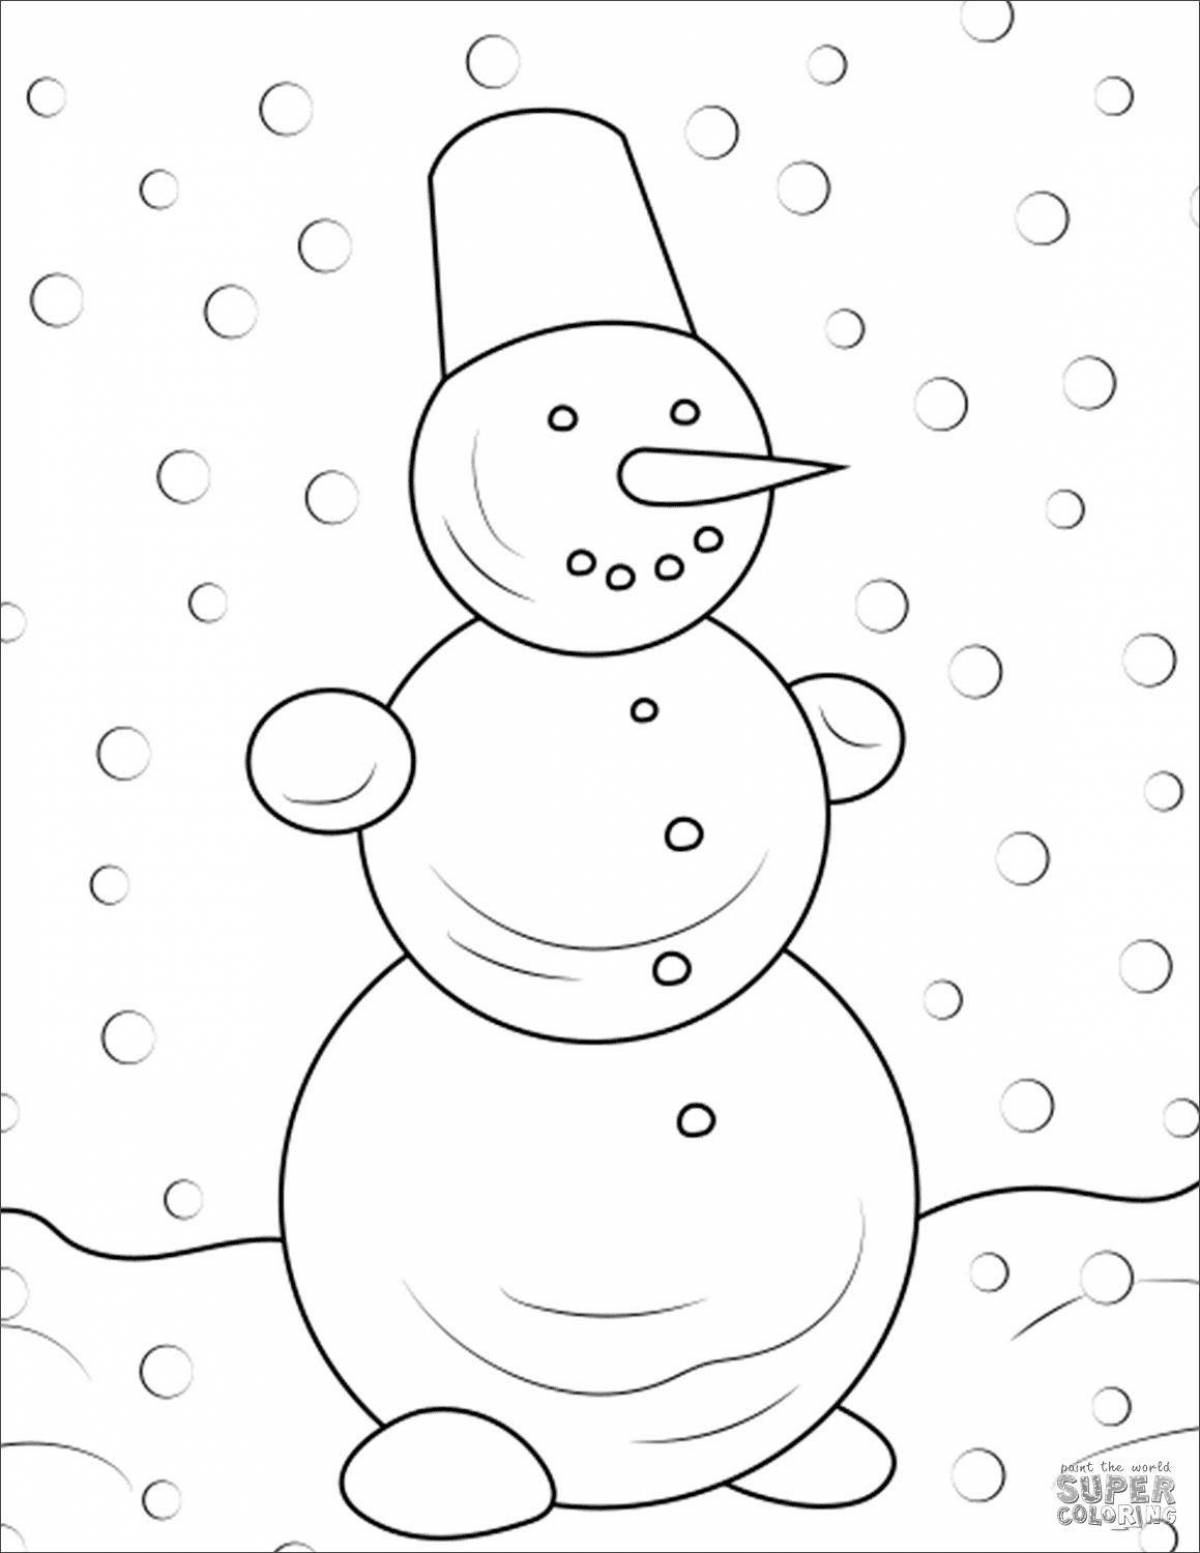 Cute snowman coloring for kids 2 3